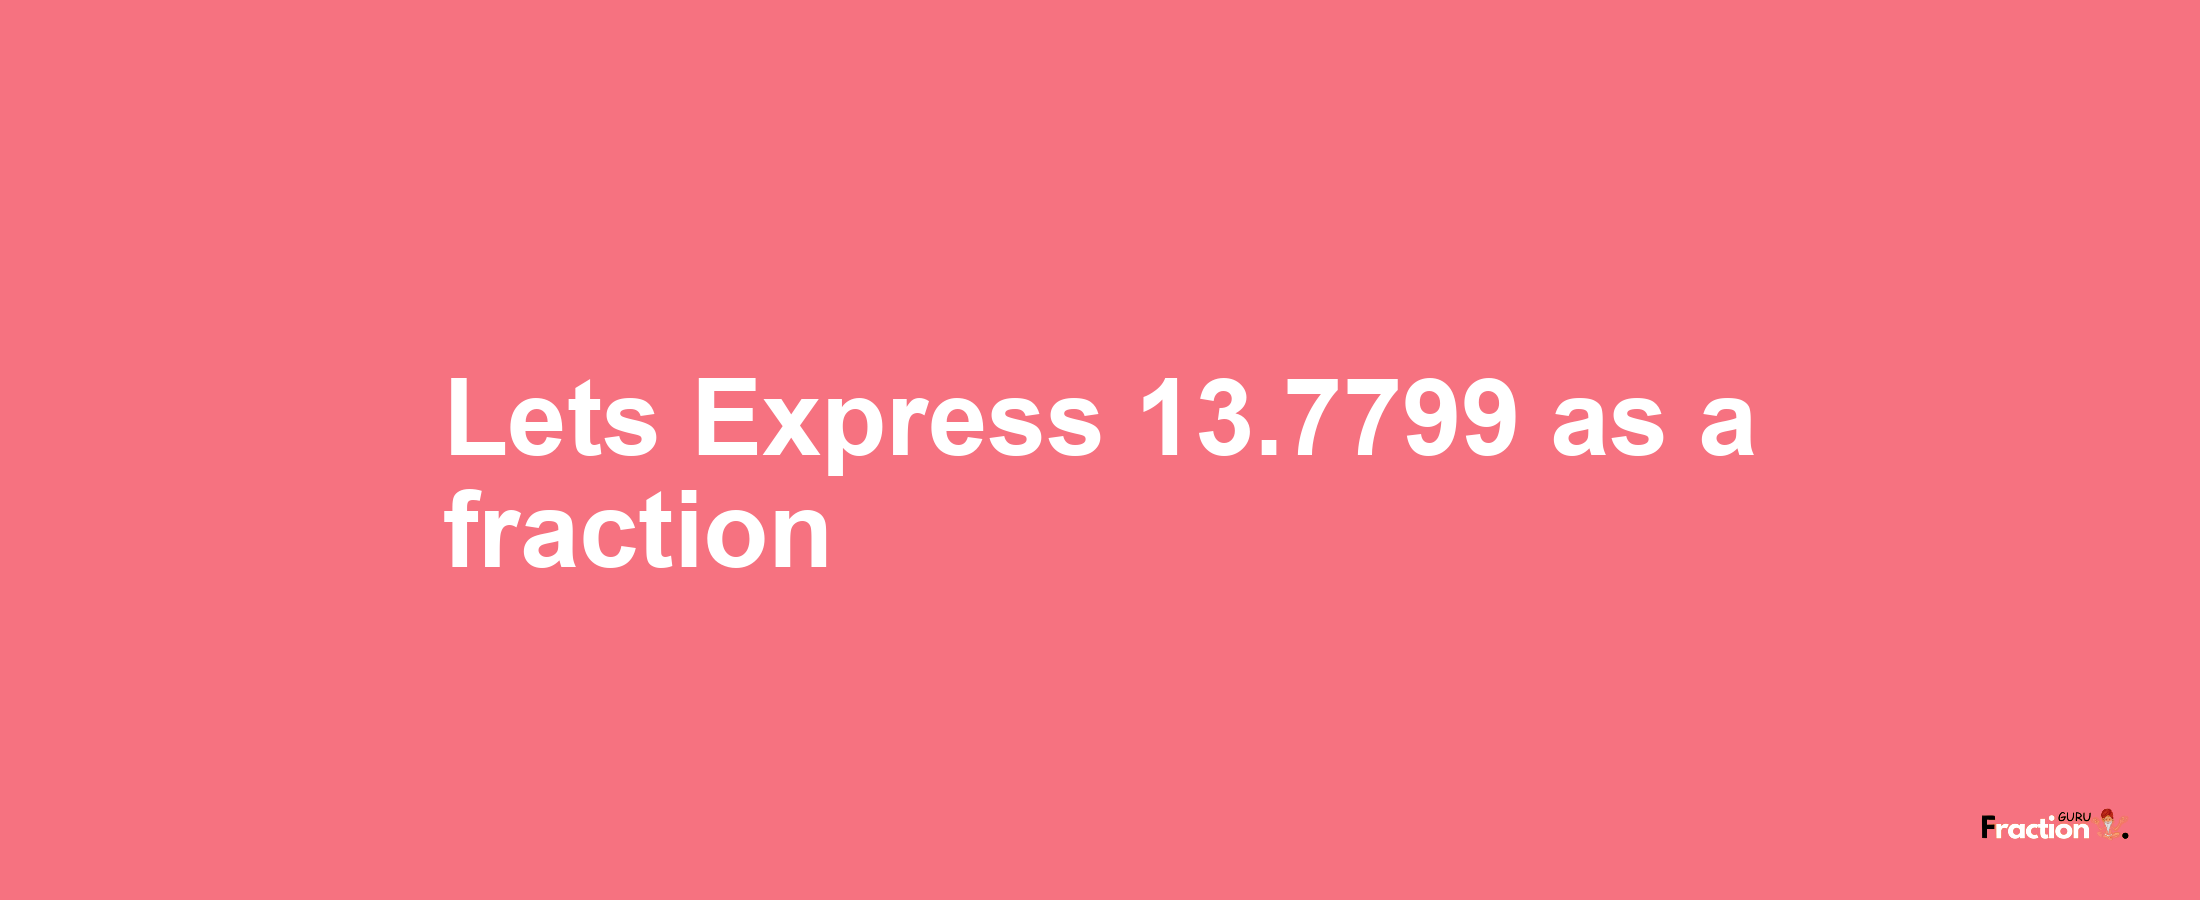 Lets Express 13.7799 as afraction